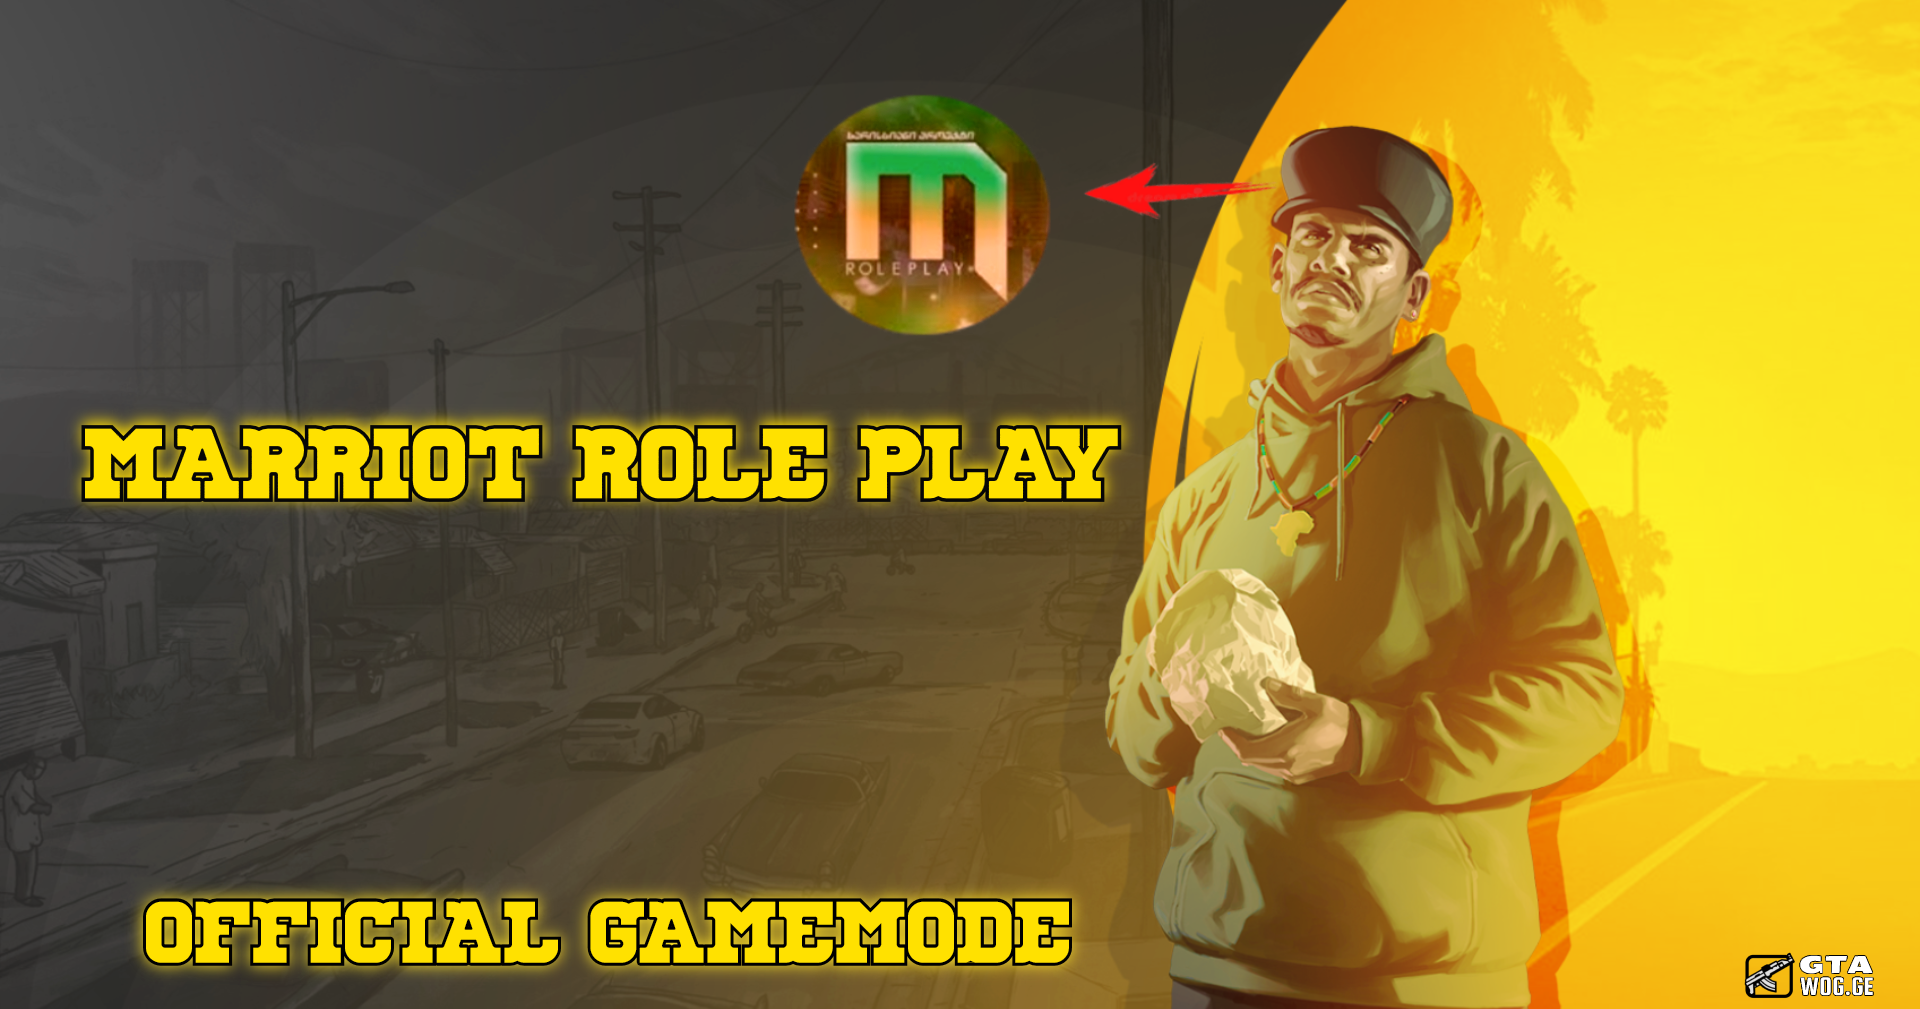 [Gamemodes] Marriot Role Play